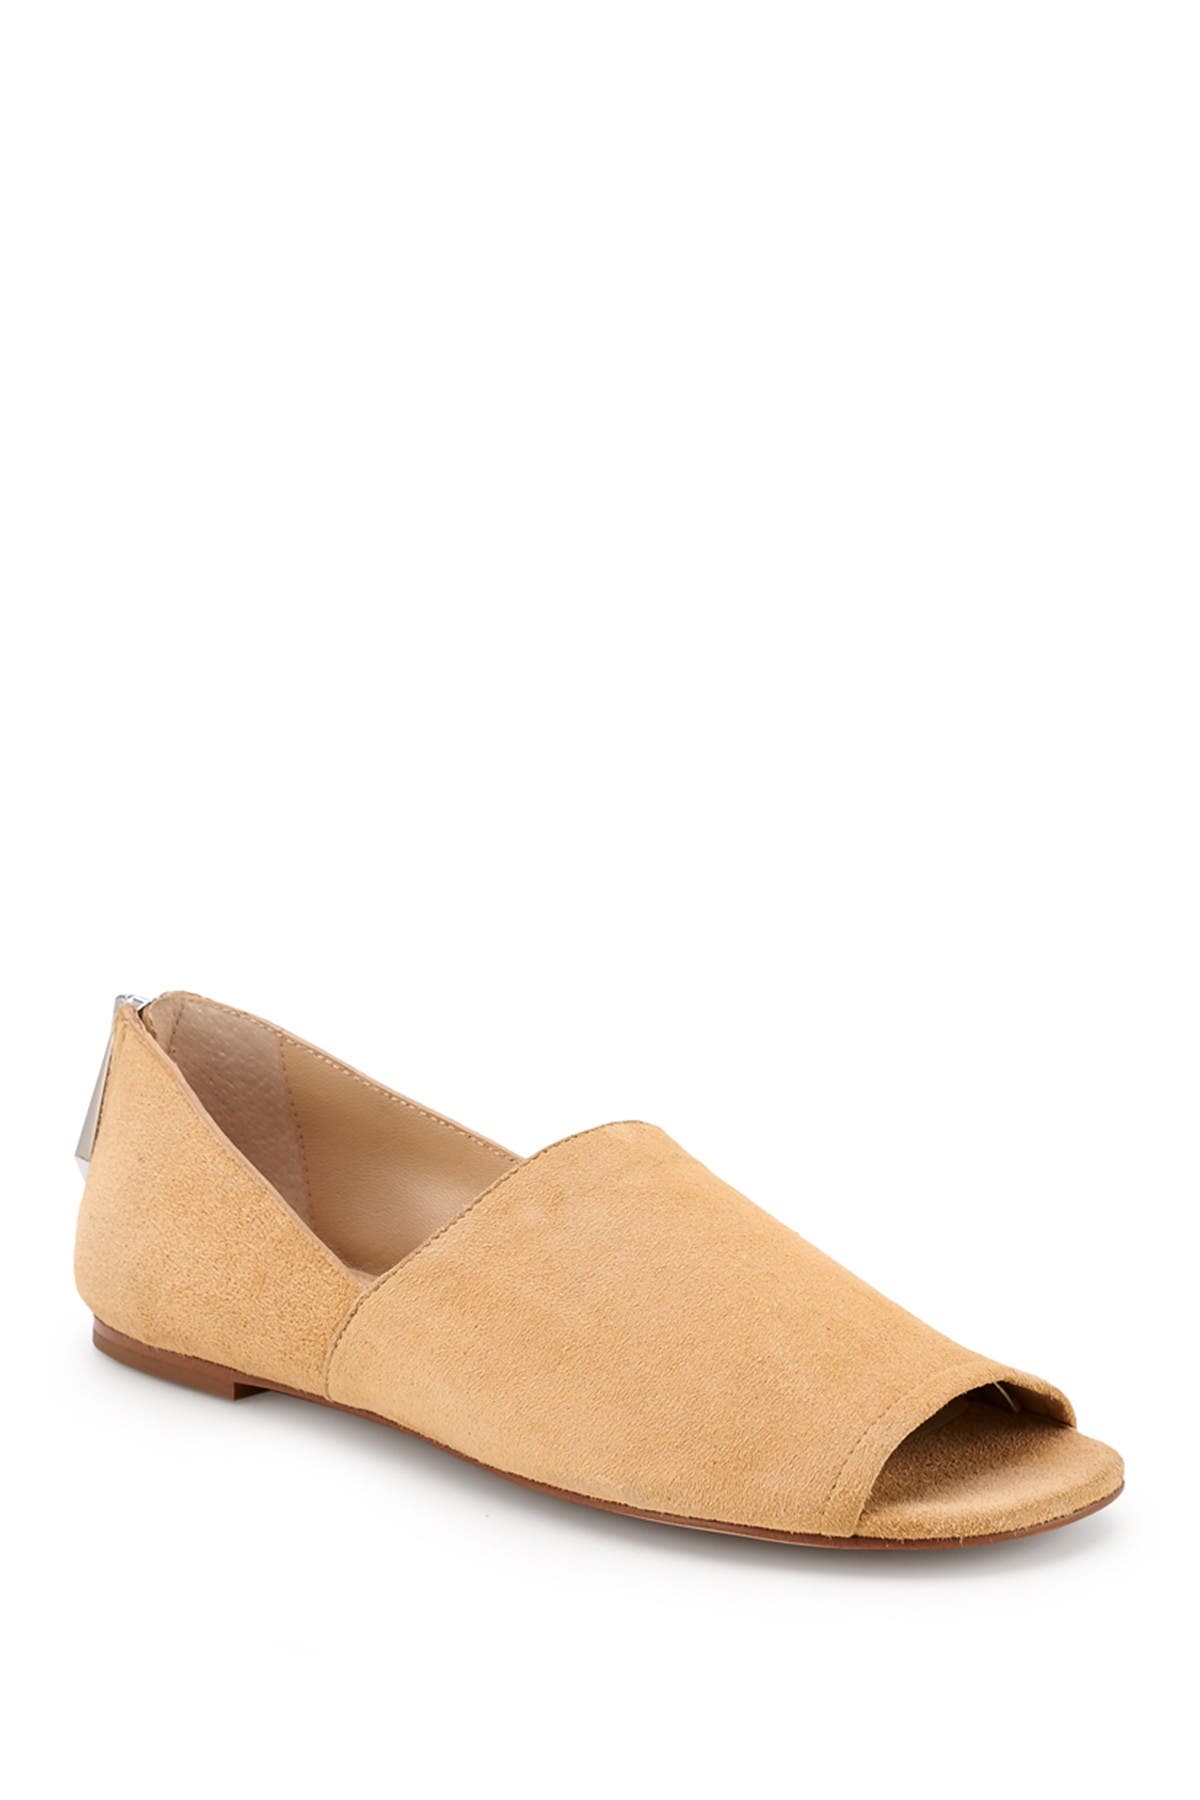 botkier shoes flats